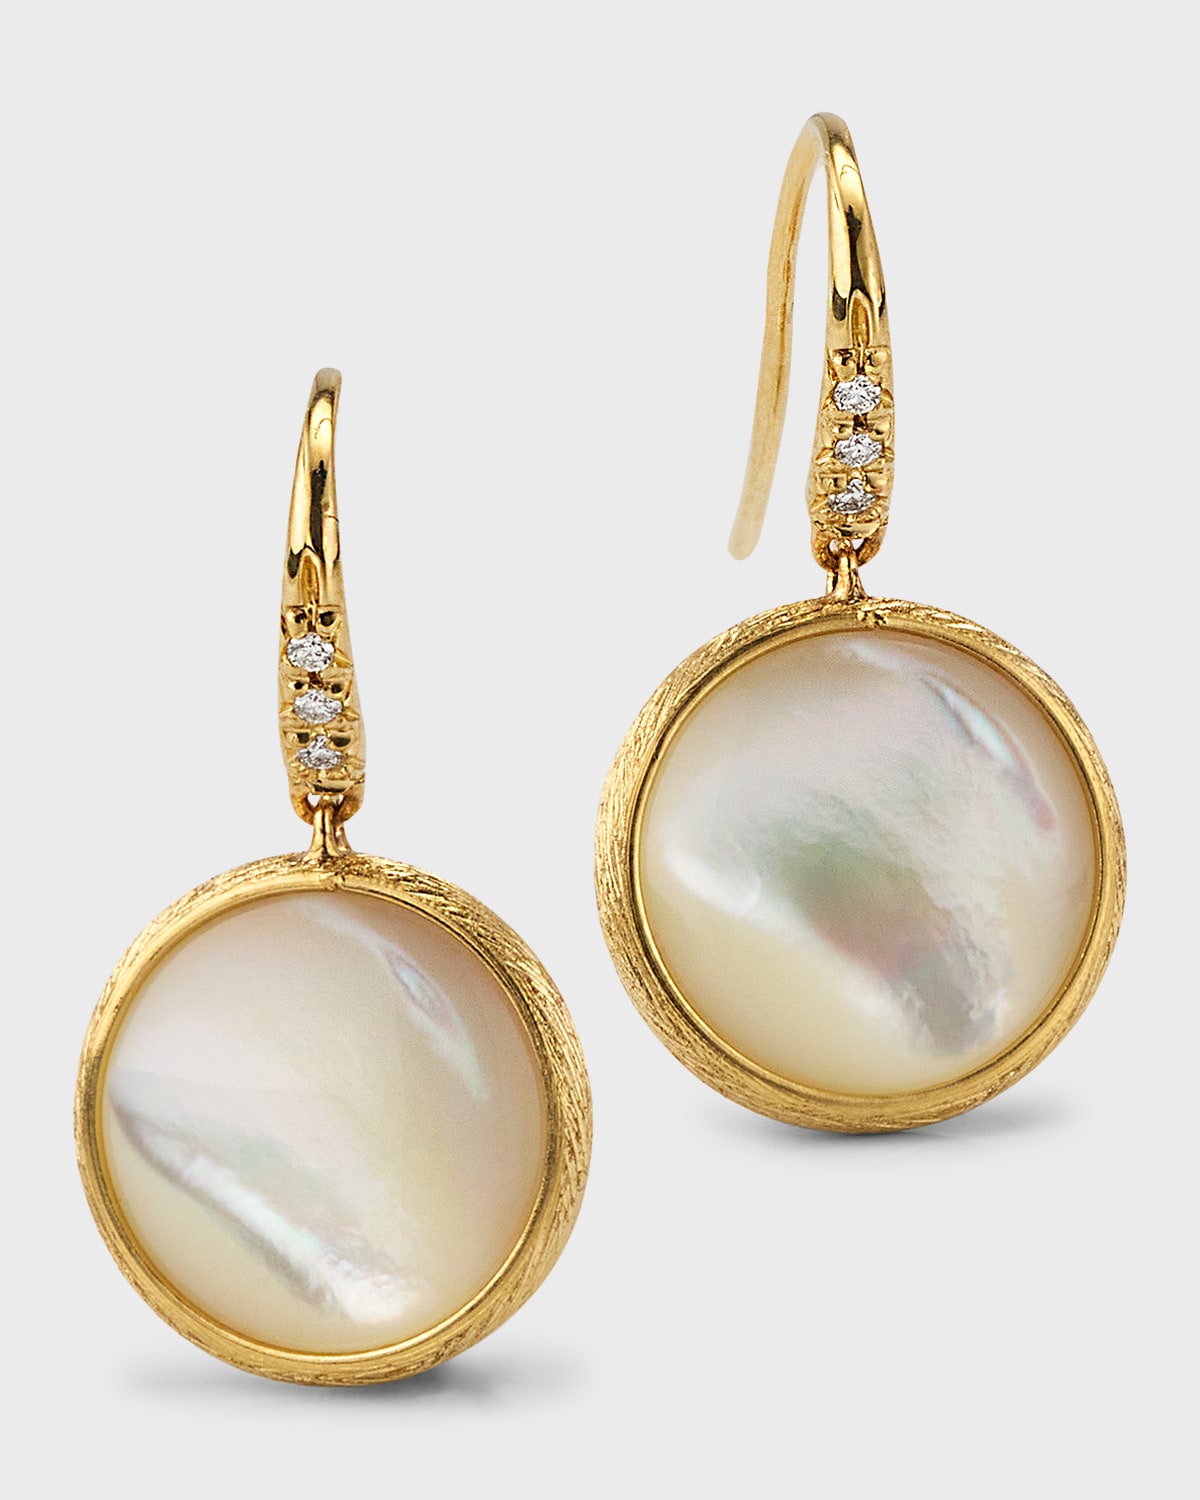 Marco Bicego Jaipur Color Drop Earrings with Diamonds and Mother-of-Pearl